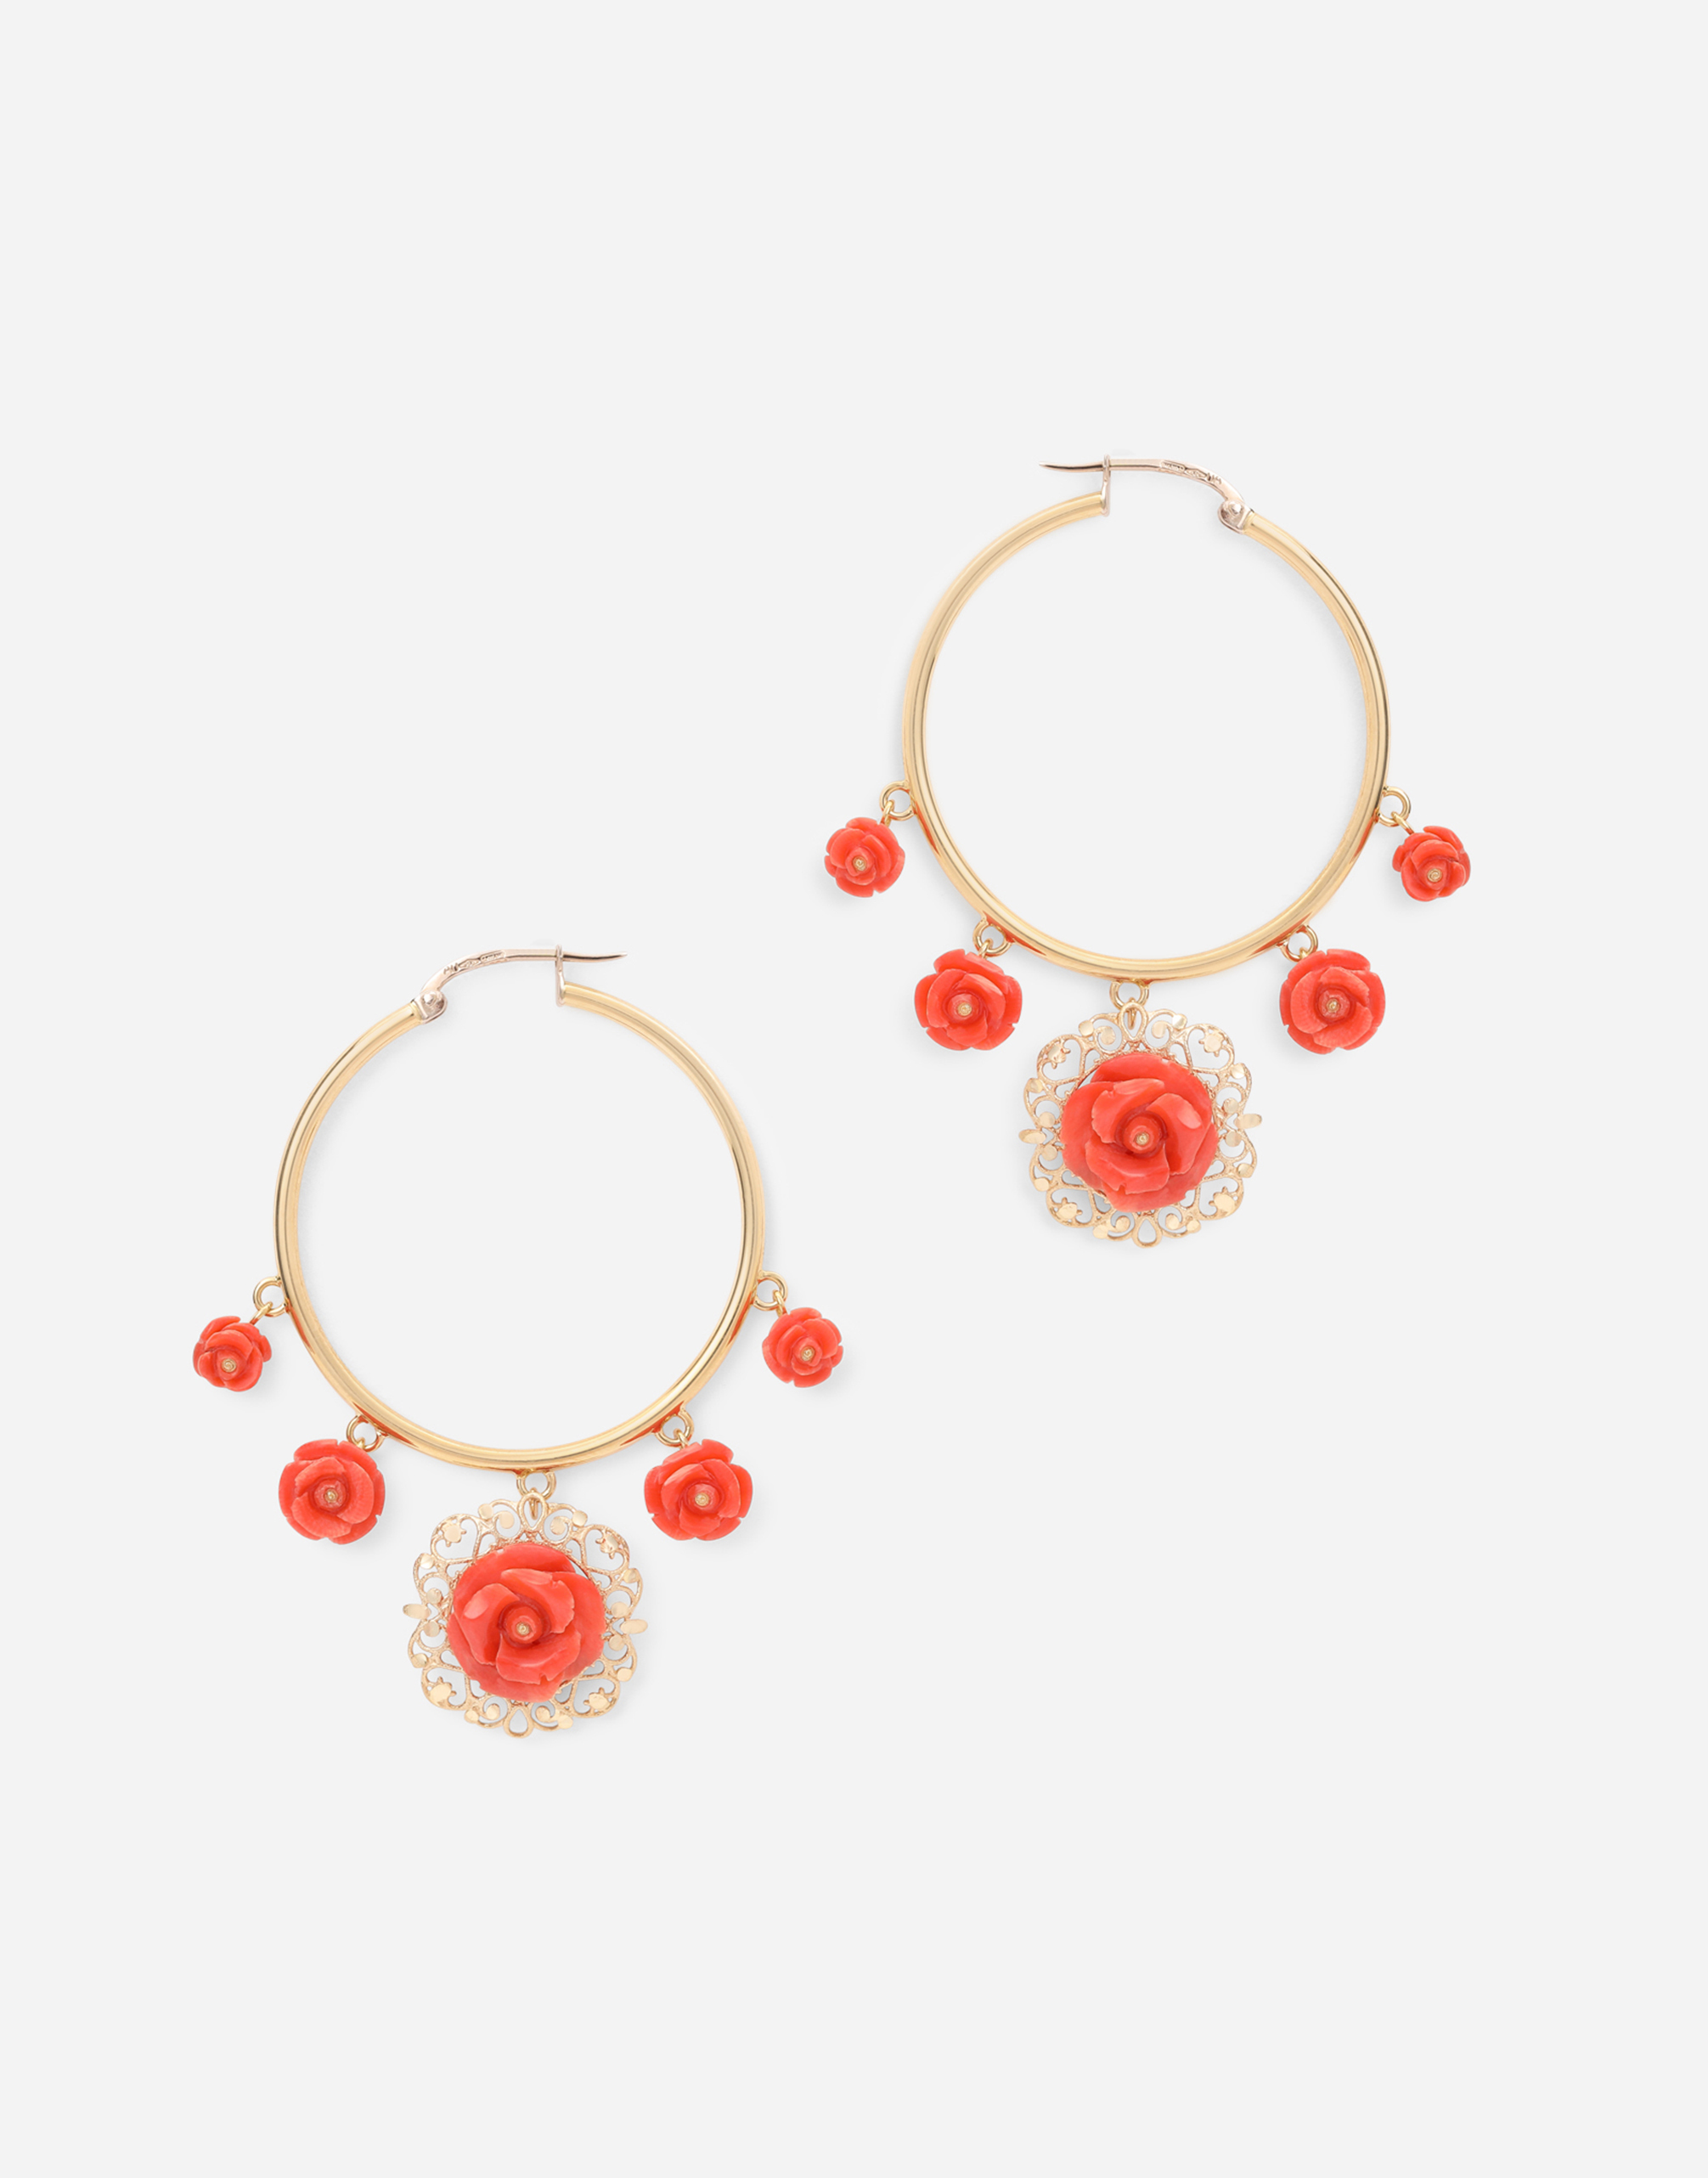 DOLCE & GABBANA CORAL LOOP EARRINGS IN YELLOW 18KT GOLD WITH CORAL ROSES